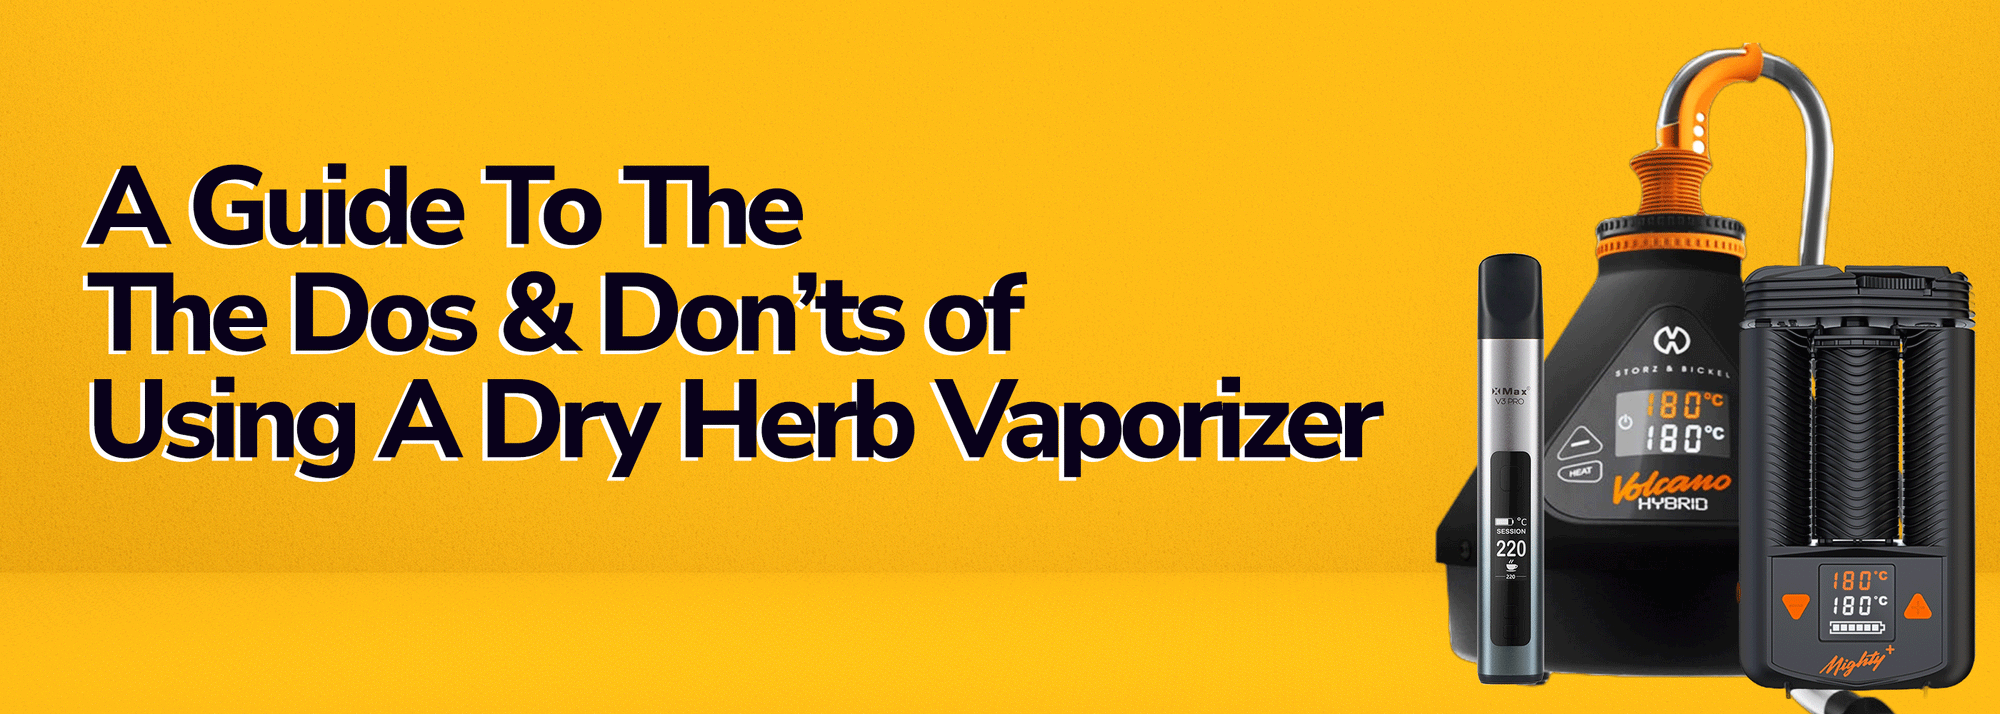 A Guide To The The Dos & Don’ts of Using A Dry Herb Vaporizer - Wick and Wire Co, Melbourne Australia